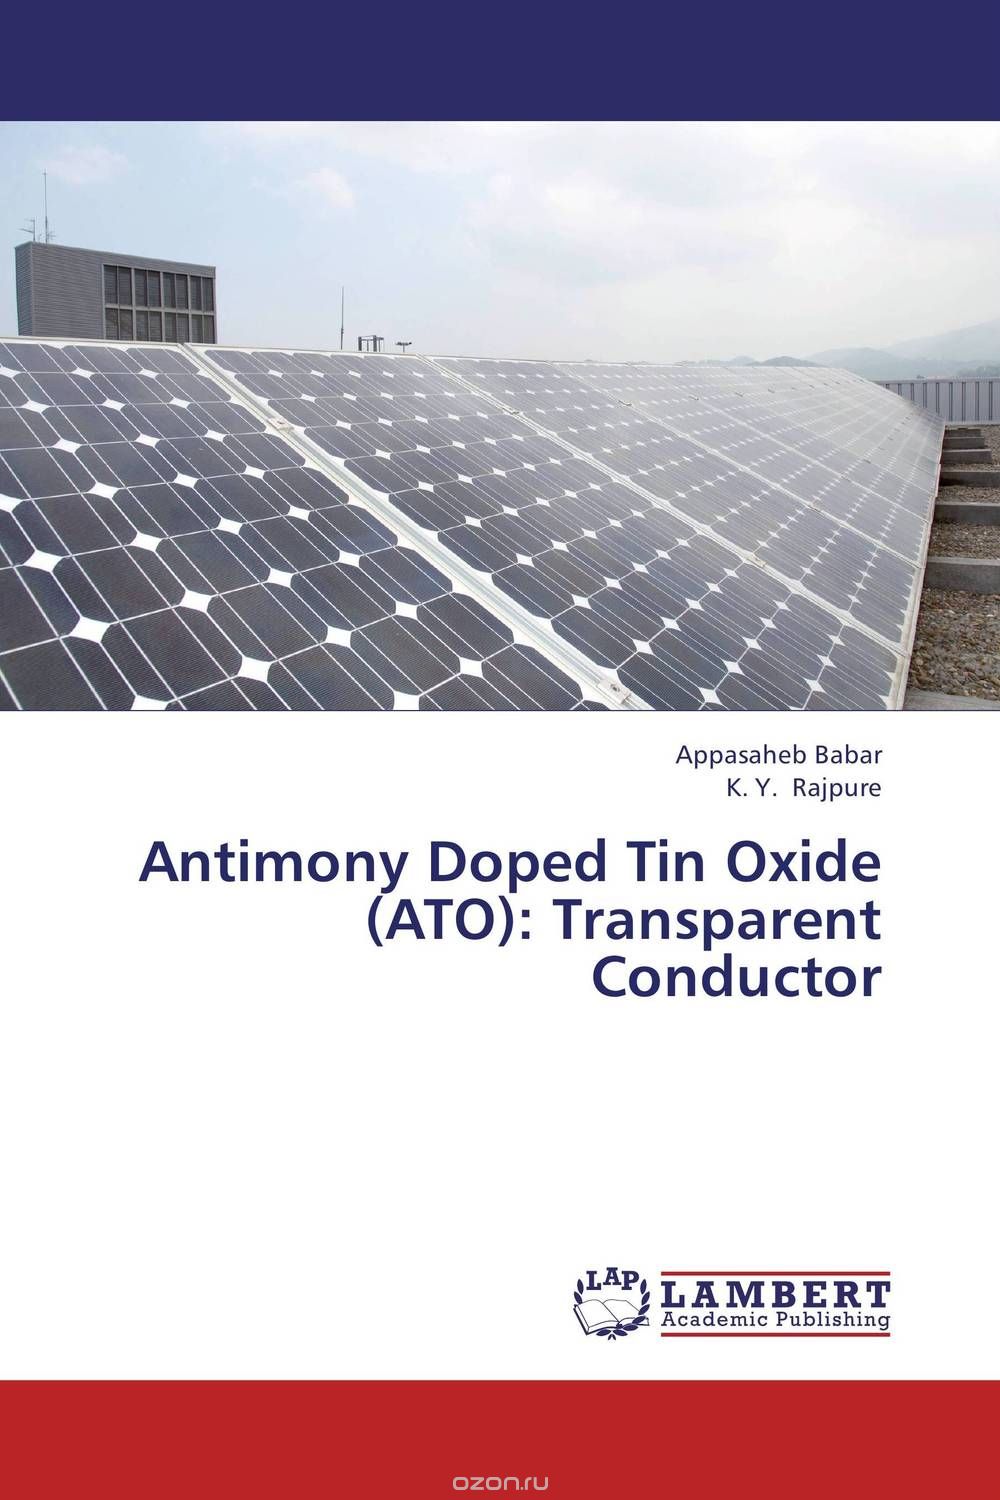 Antimony Doped Tin Oxide (ATO): Transparent Conductor